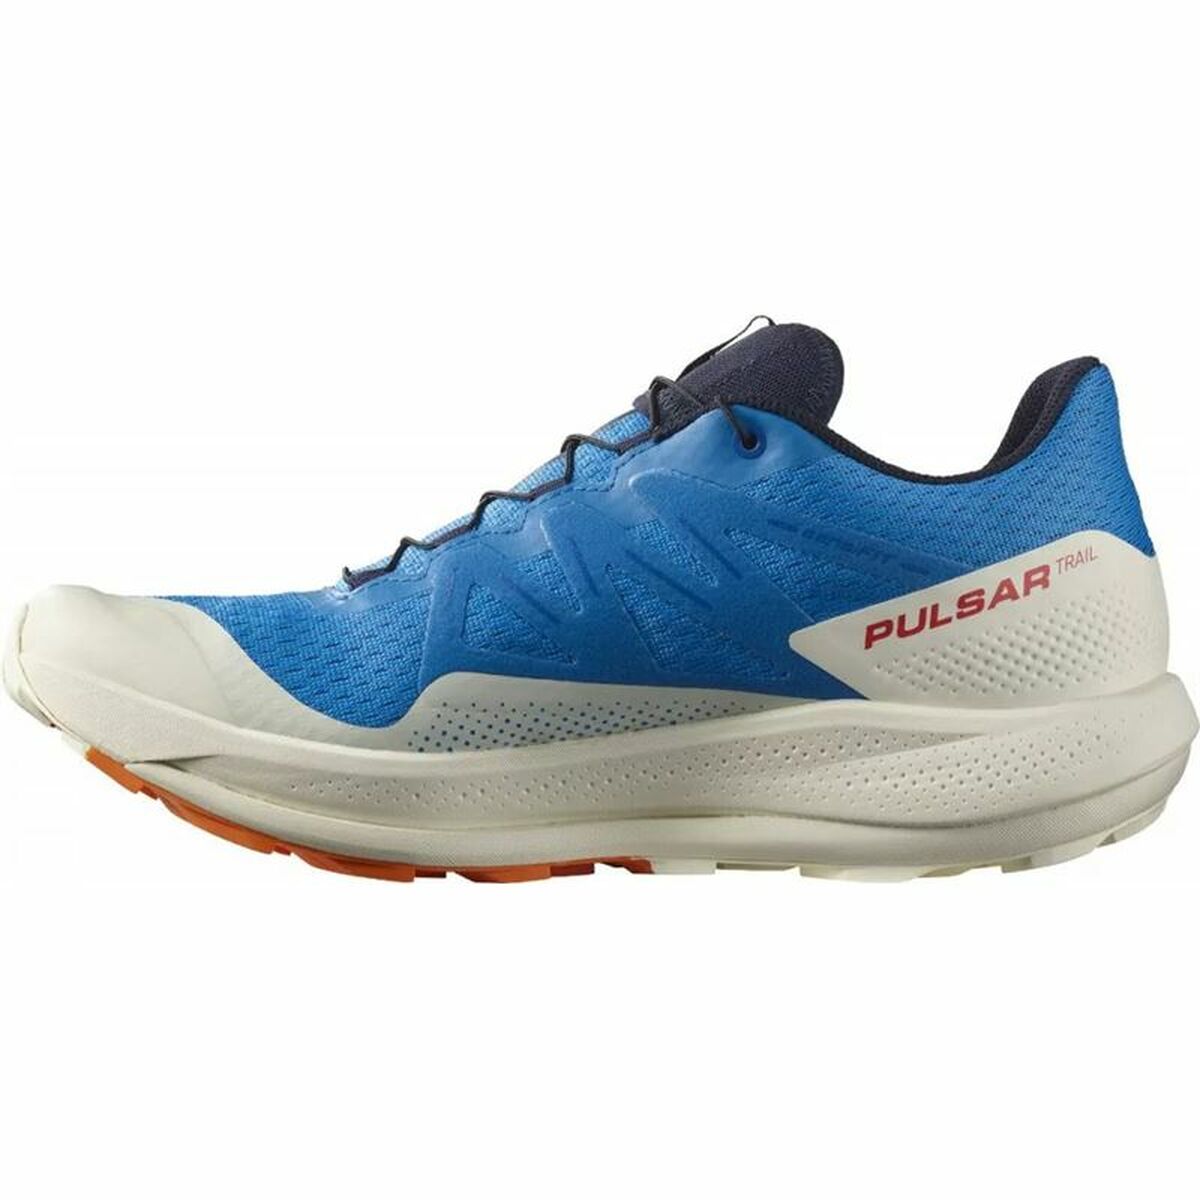 Running Shoes for Adults Salomon Pulsar Trail Blue